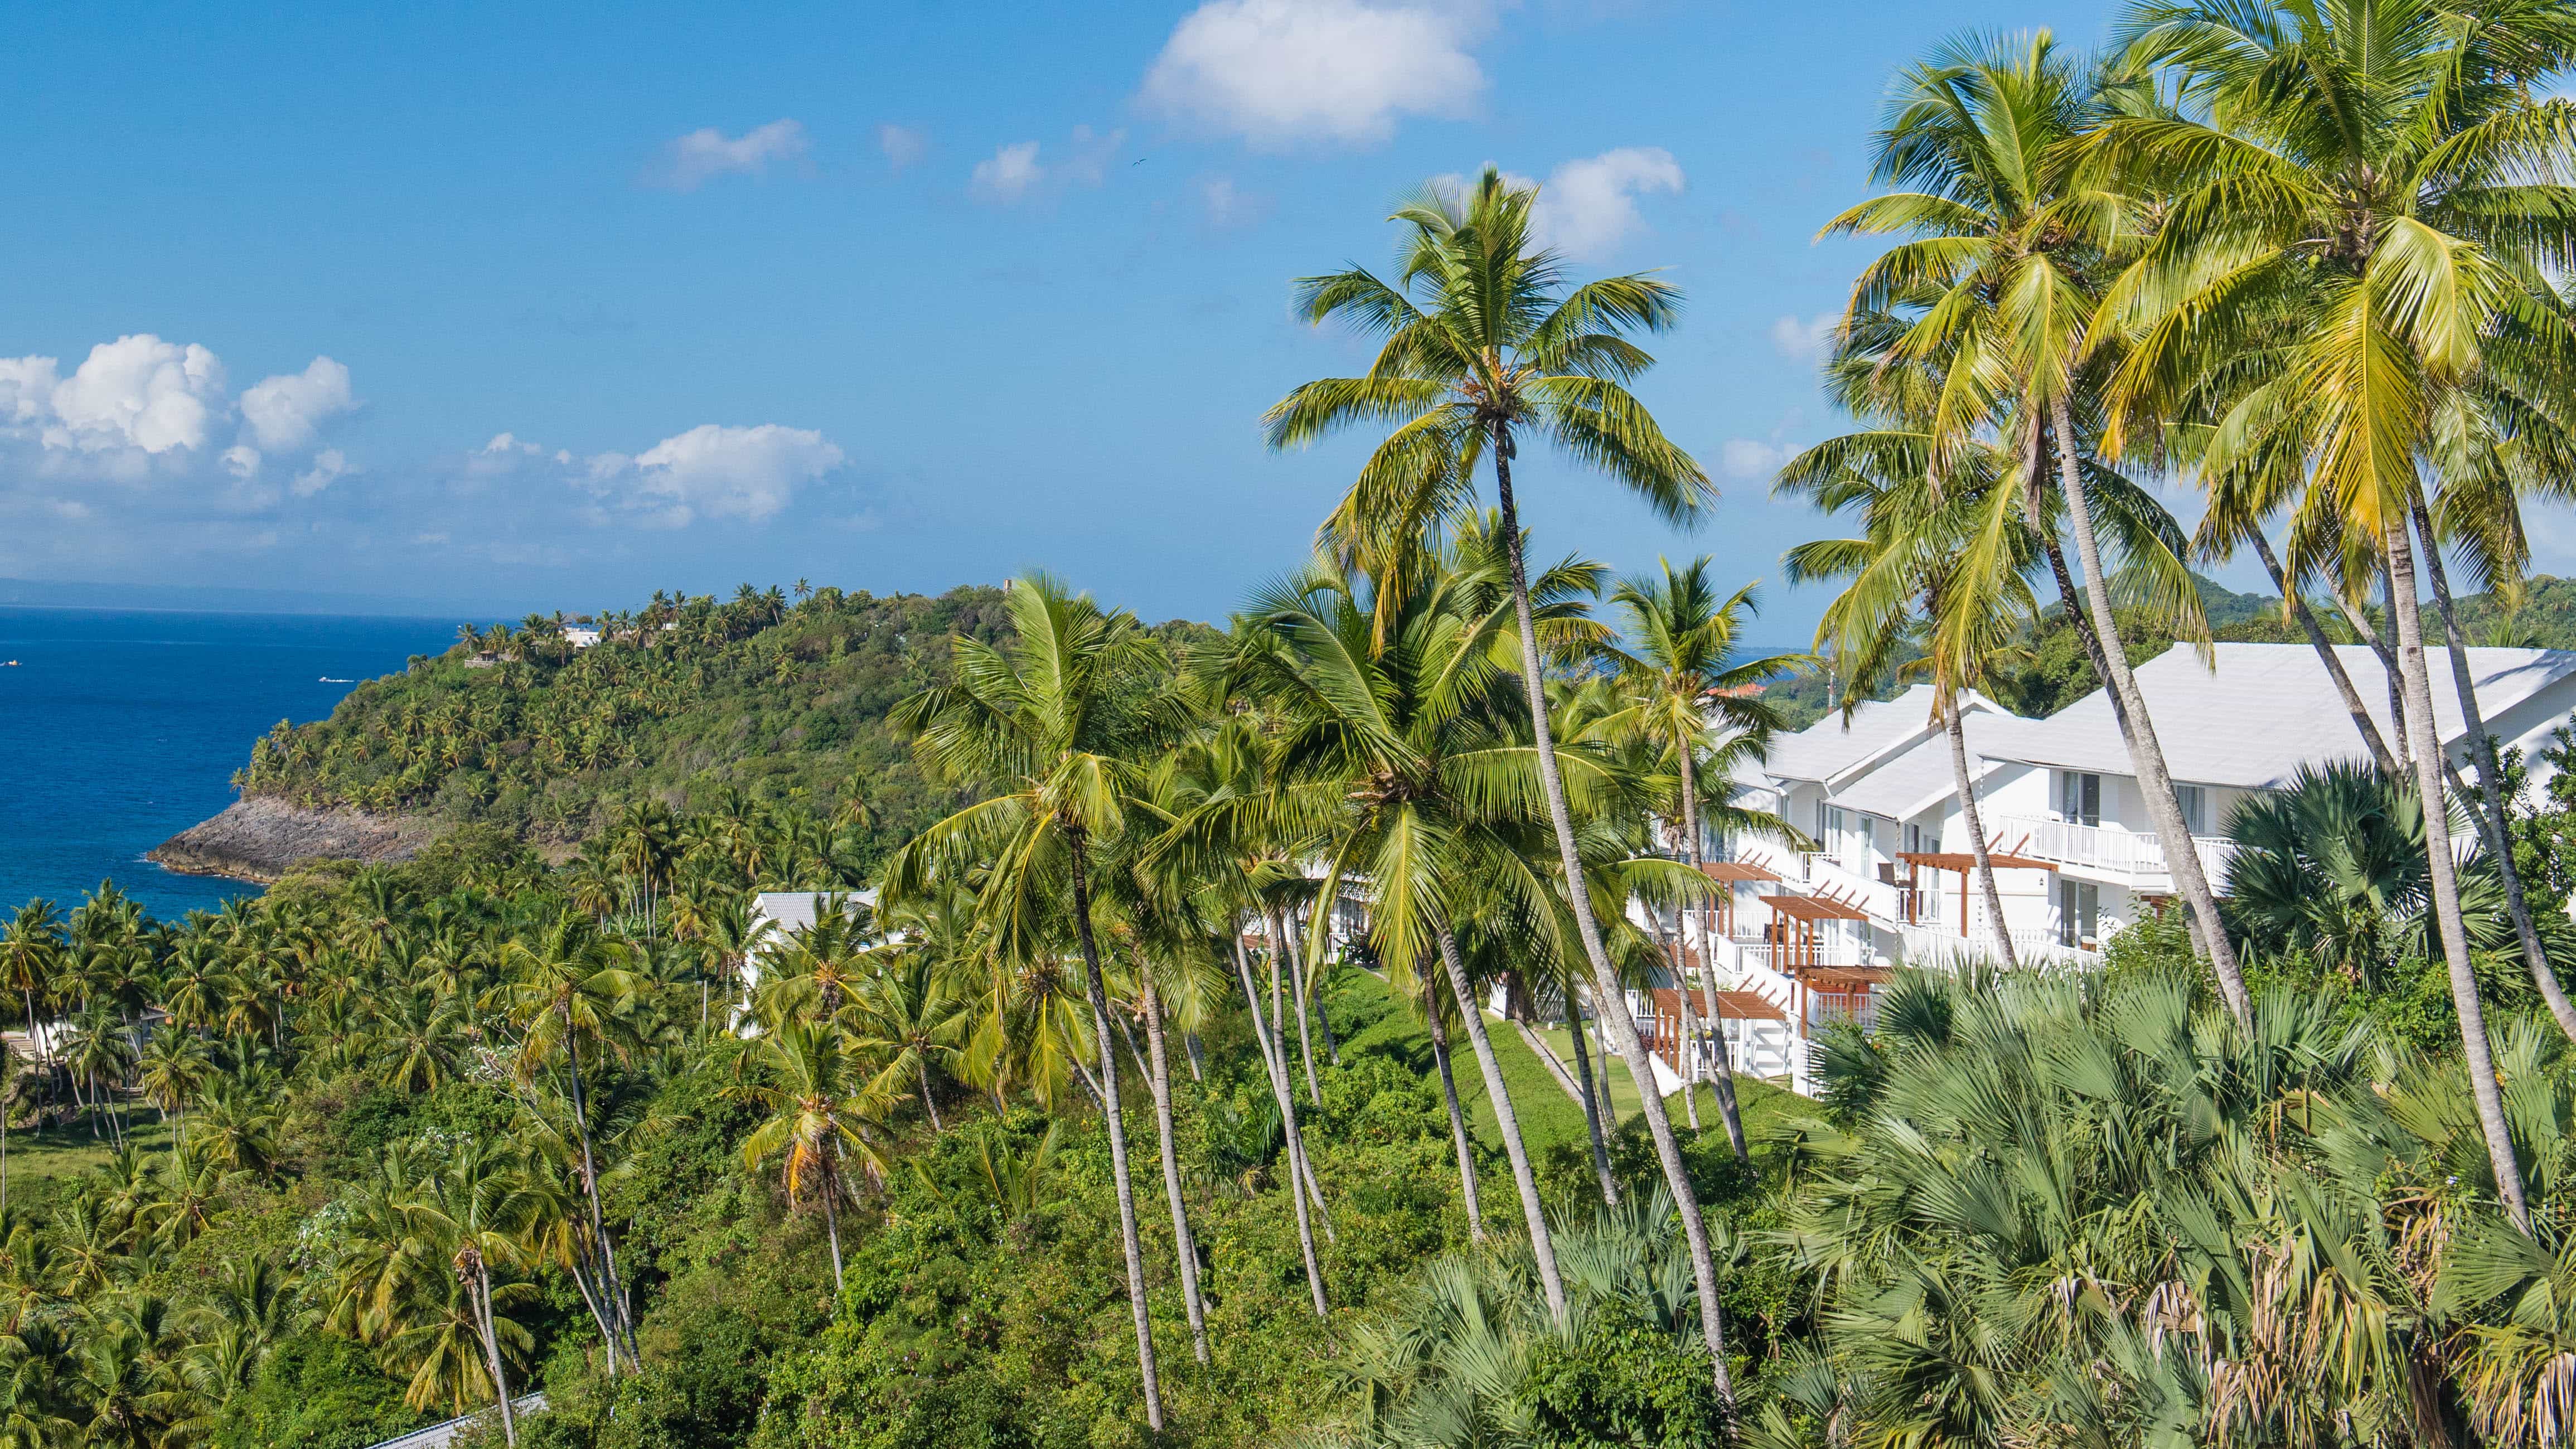 Xeliter is sprinkled on a steep slope affording incredible views of the Samana Bay.